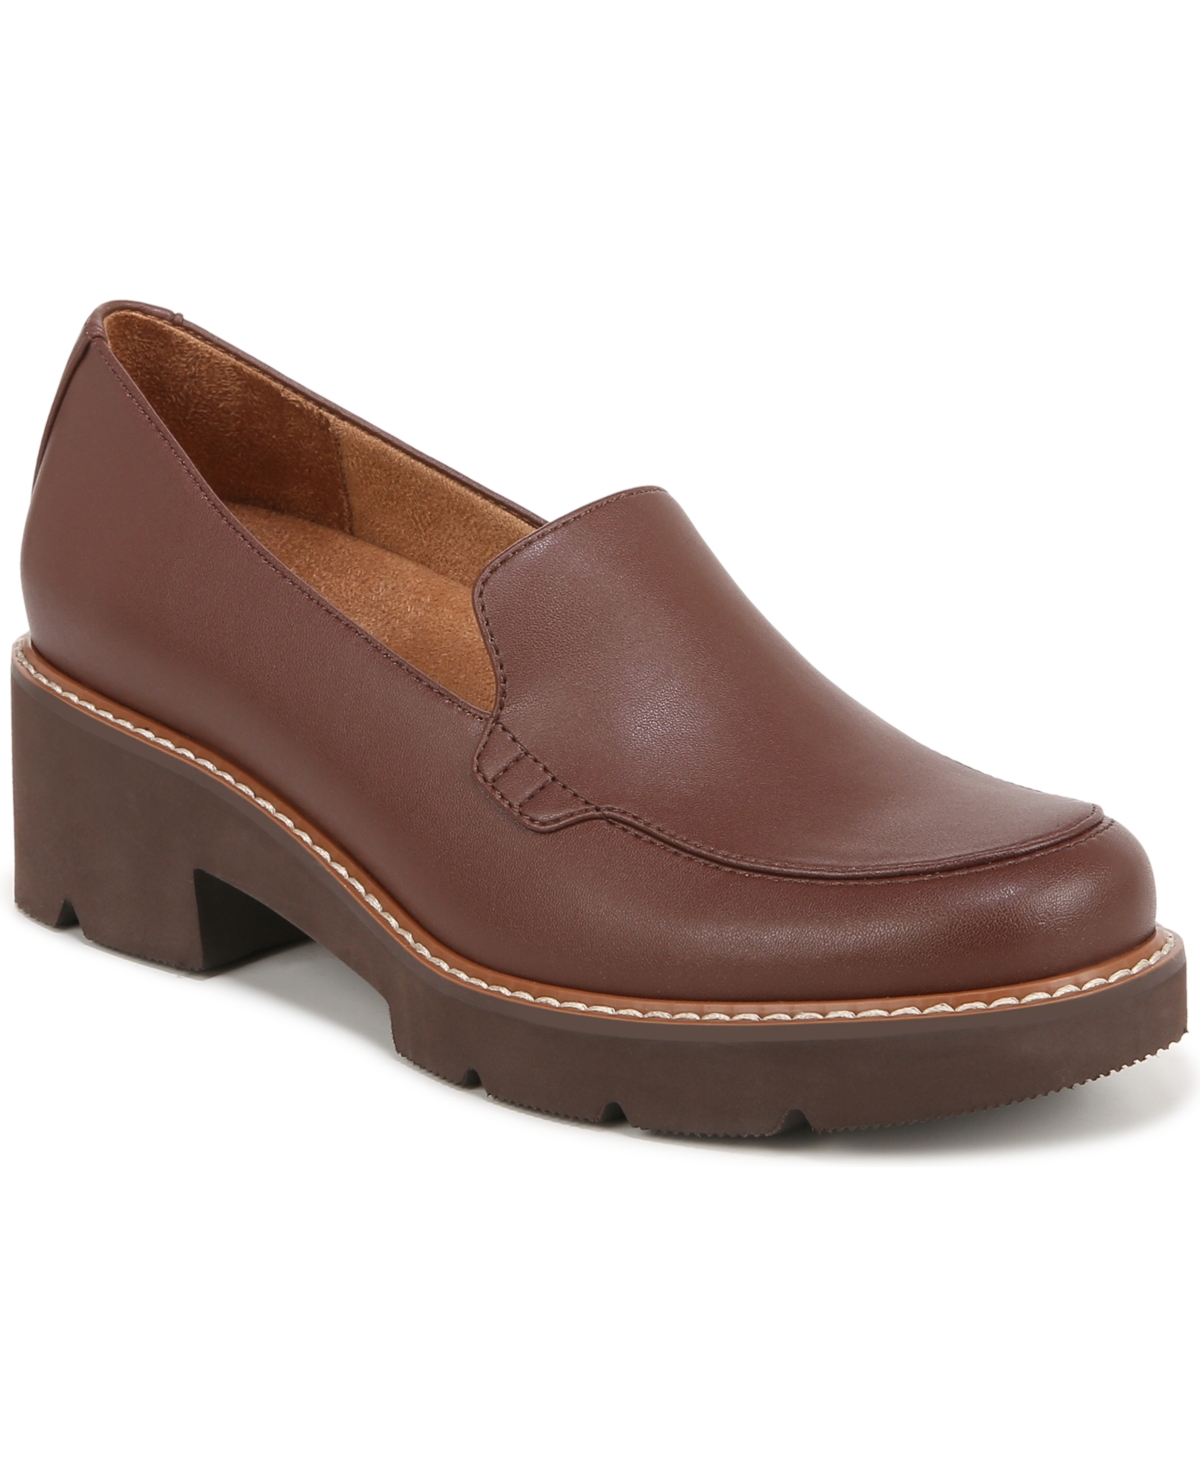 Cabaret Lug Sole Loafers - Cappuccino Brown Faux Leather